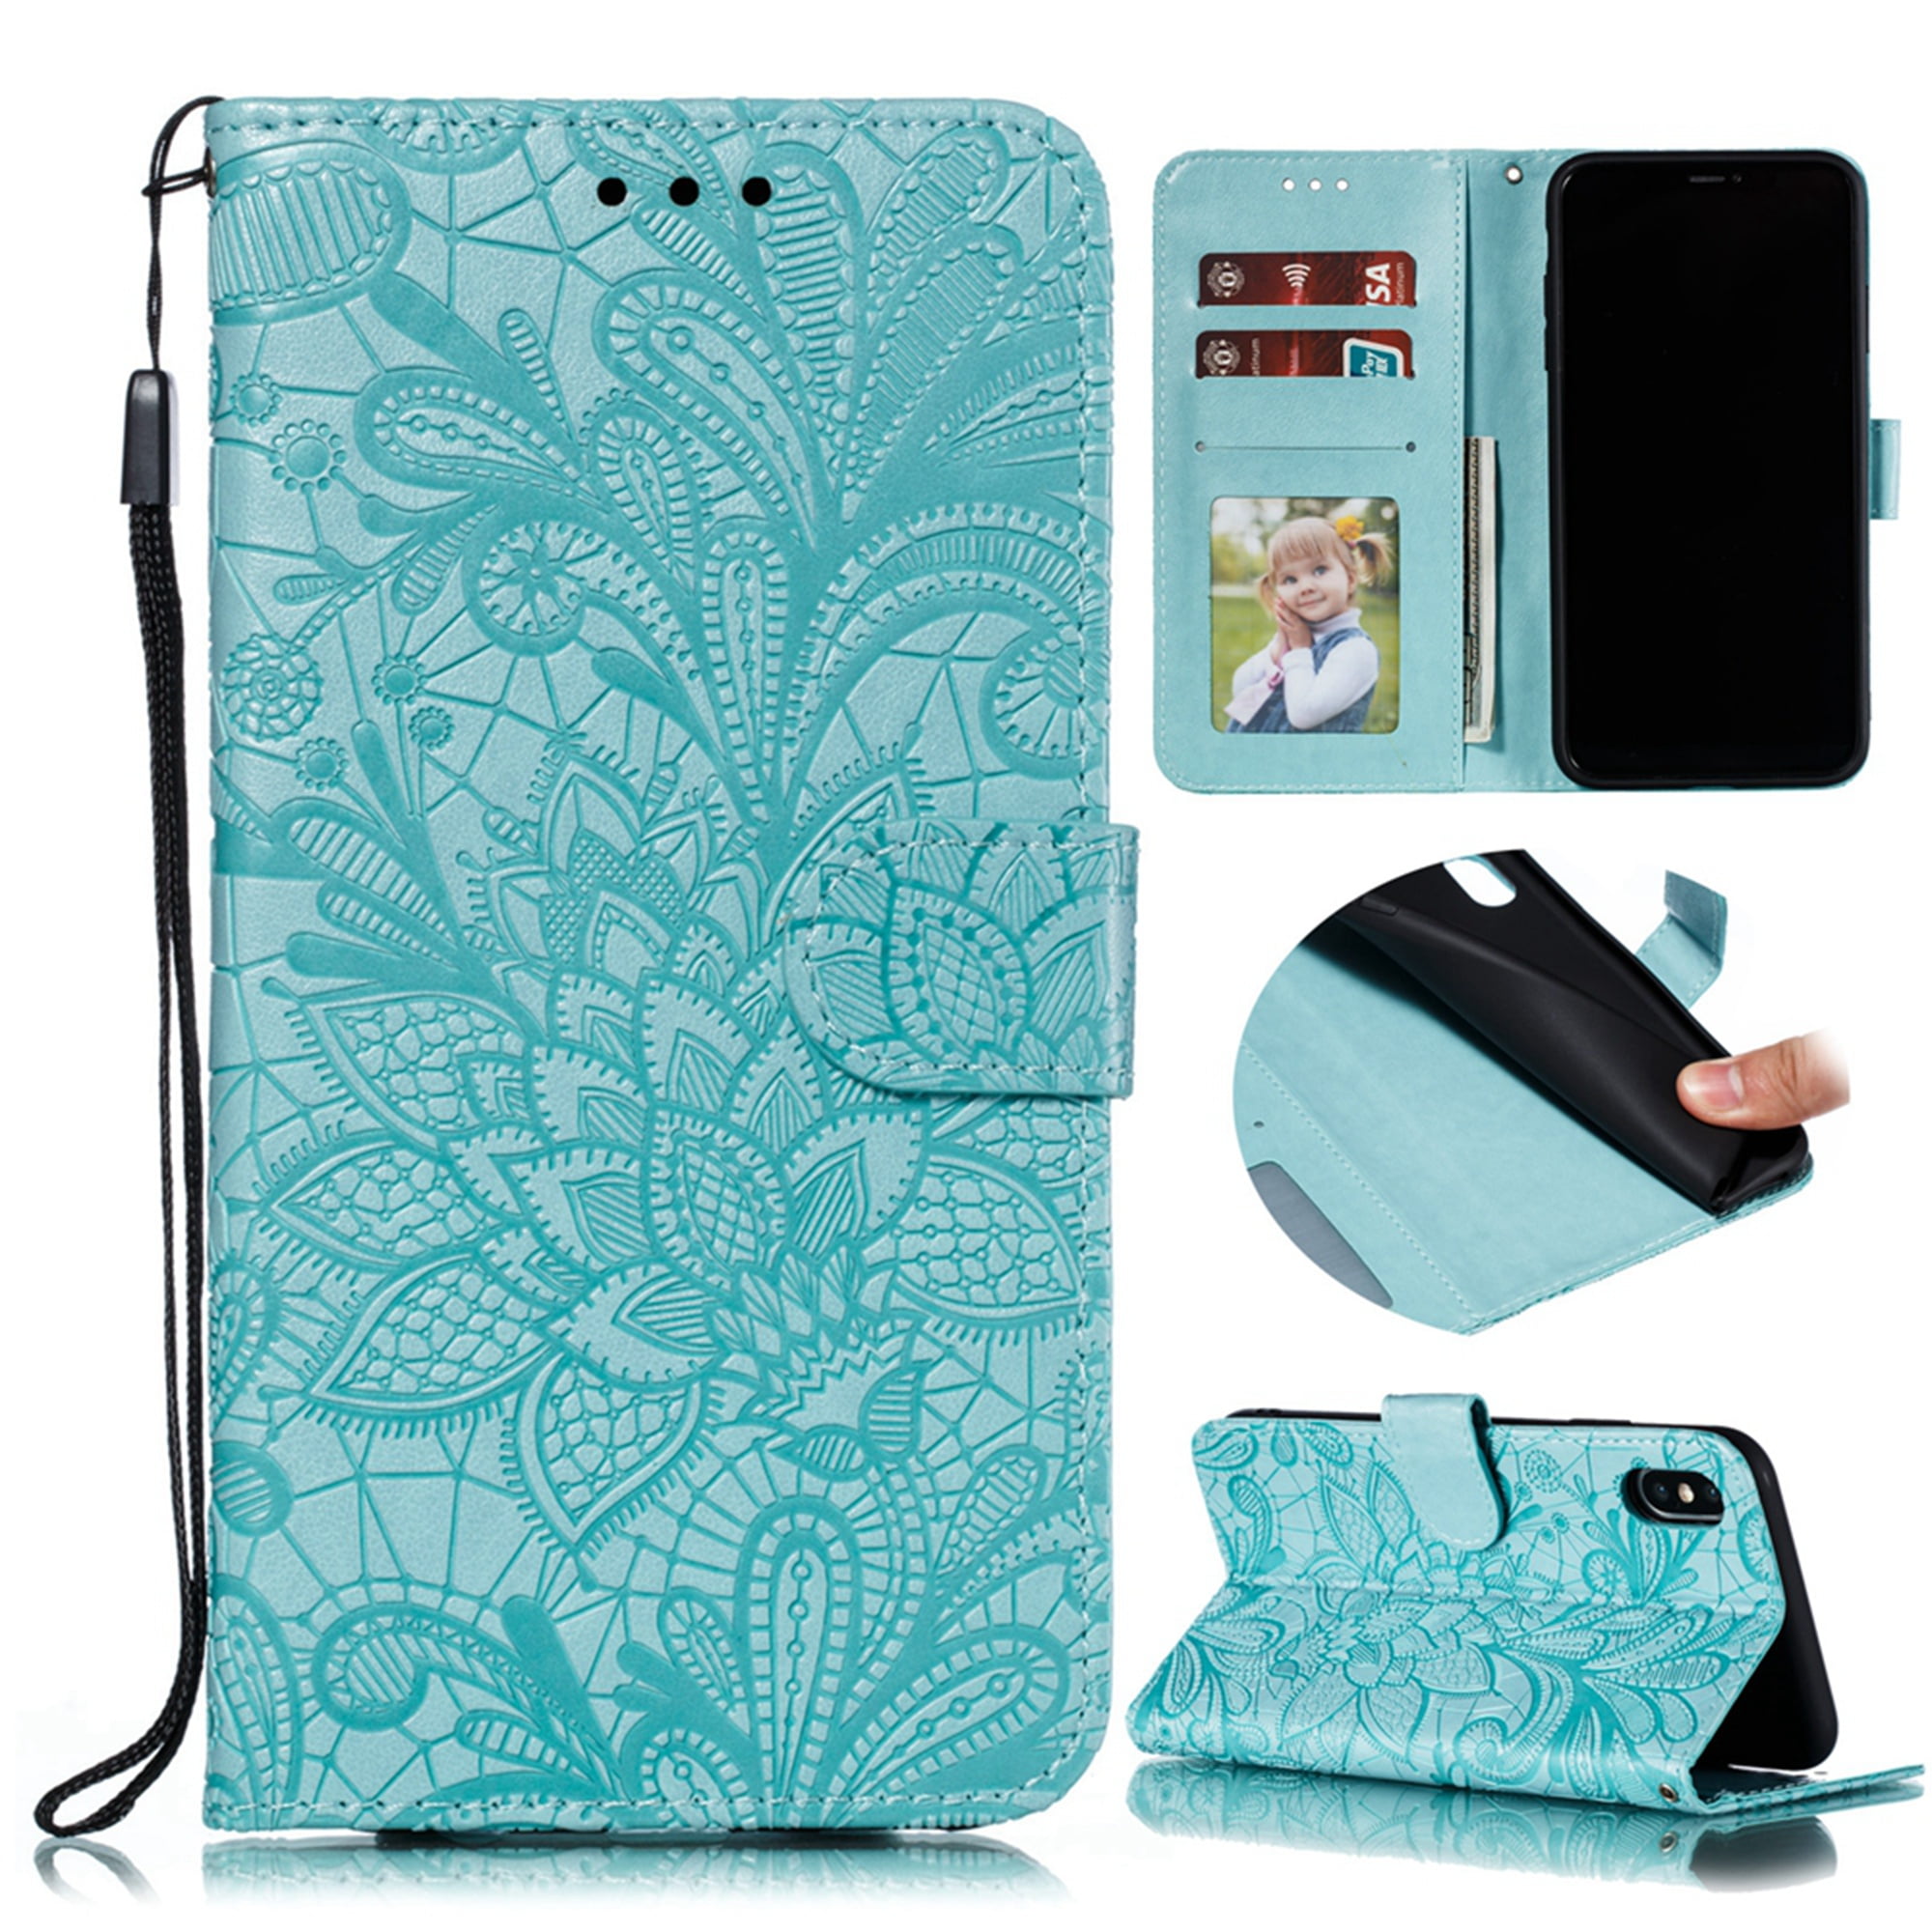 Flower PU Leather Wallet Flip Case for iPhone XR Positive Cover Compatible with iPhone XR 